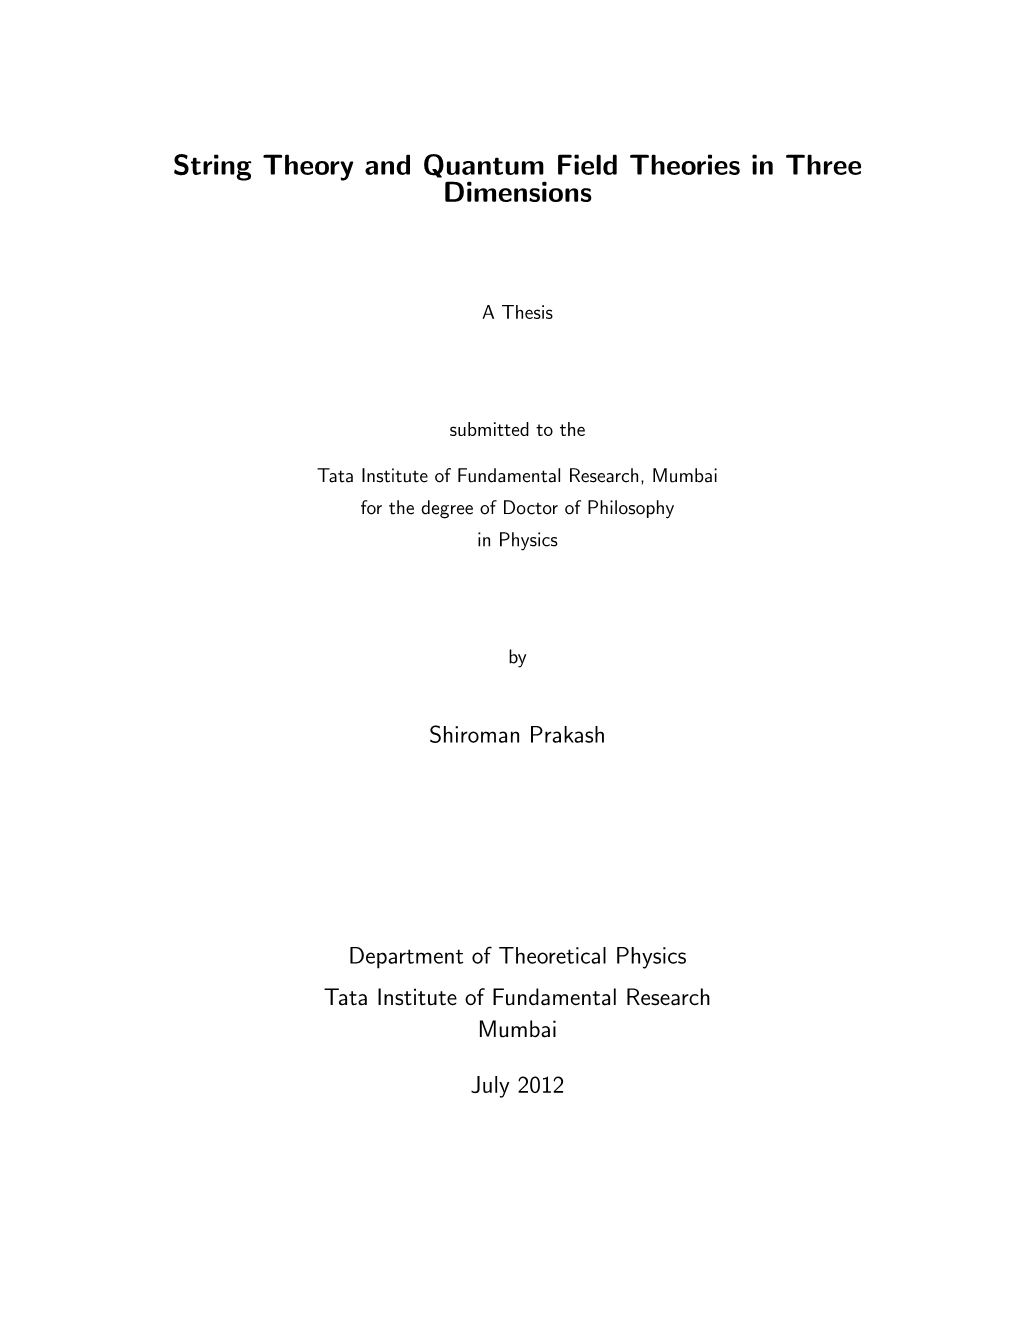 String Theory and Quantum Field Theories in Three Dimensions